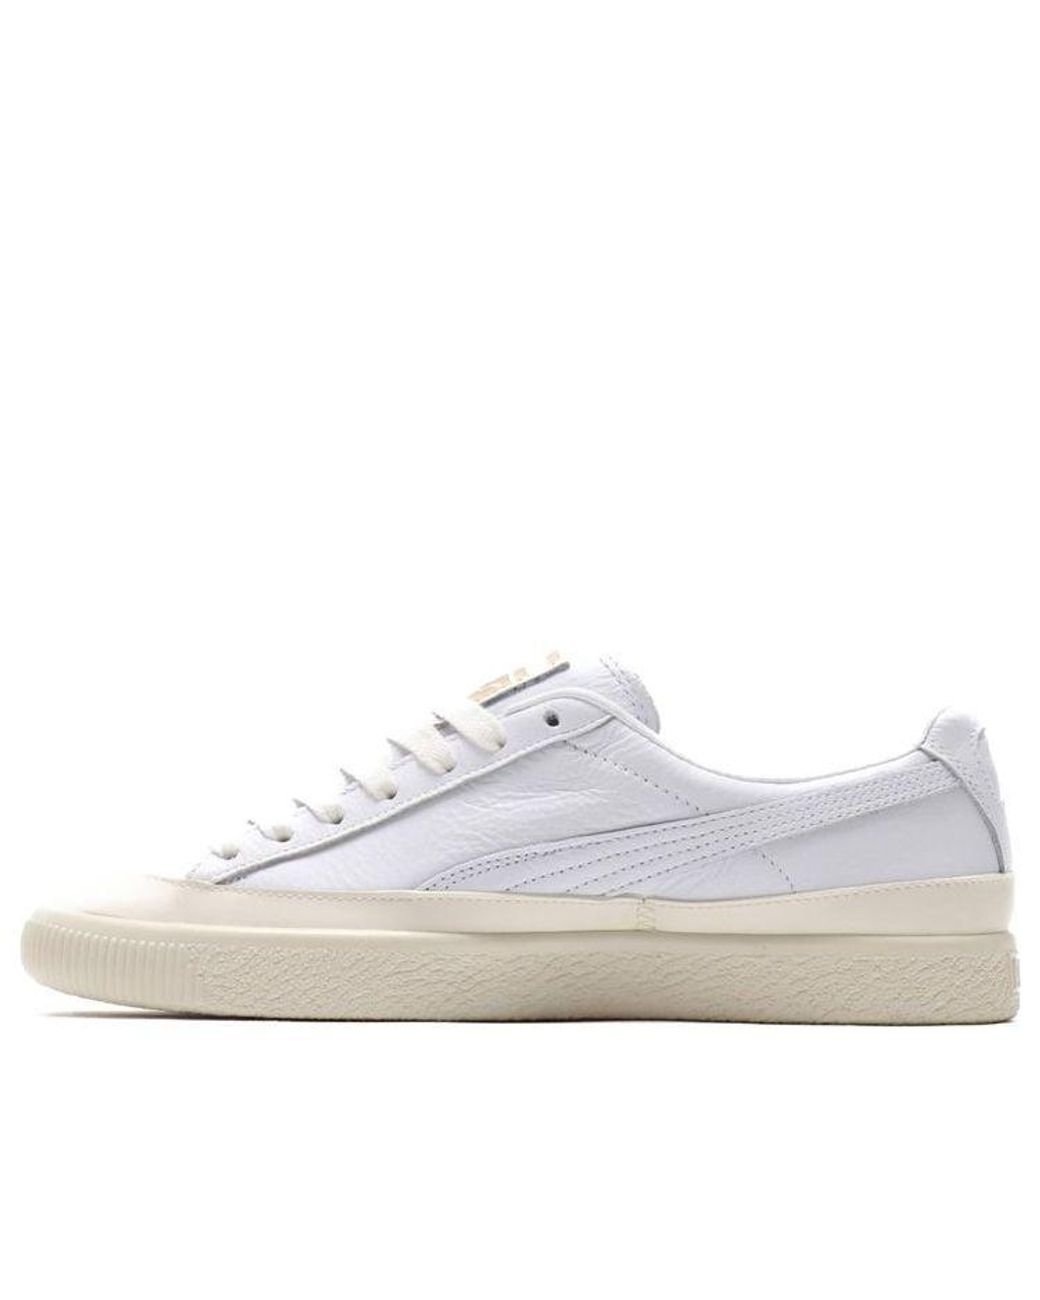 PUMA Clyde Rubber Toe Leather Leisure Board Shoes White for Men | Lyst